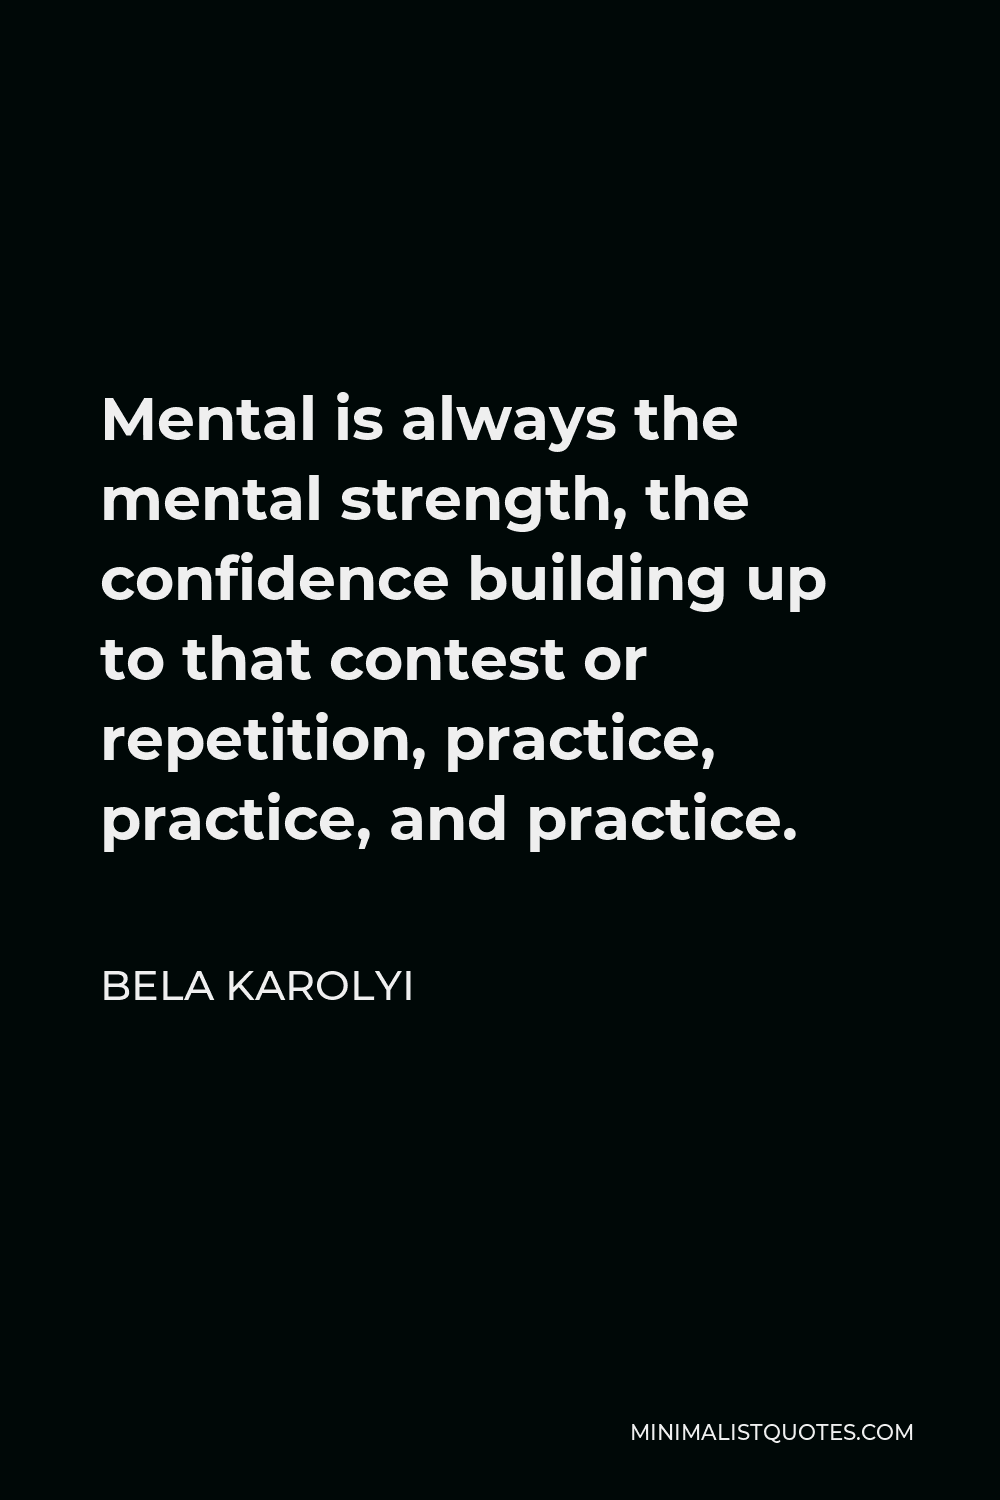 Bela Karolyi Quote - Mental is always the mental strength, the confidence building up to that contest or repetition, practice, practice, and practice.